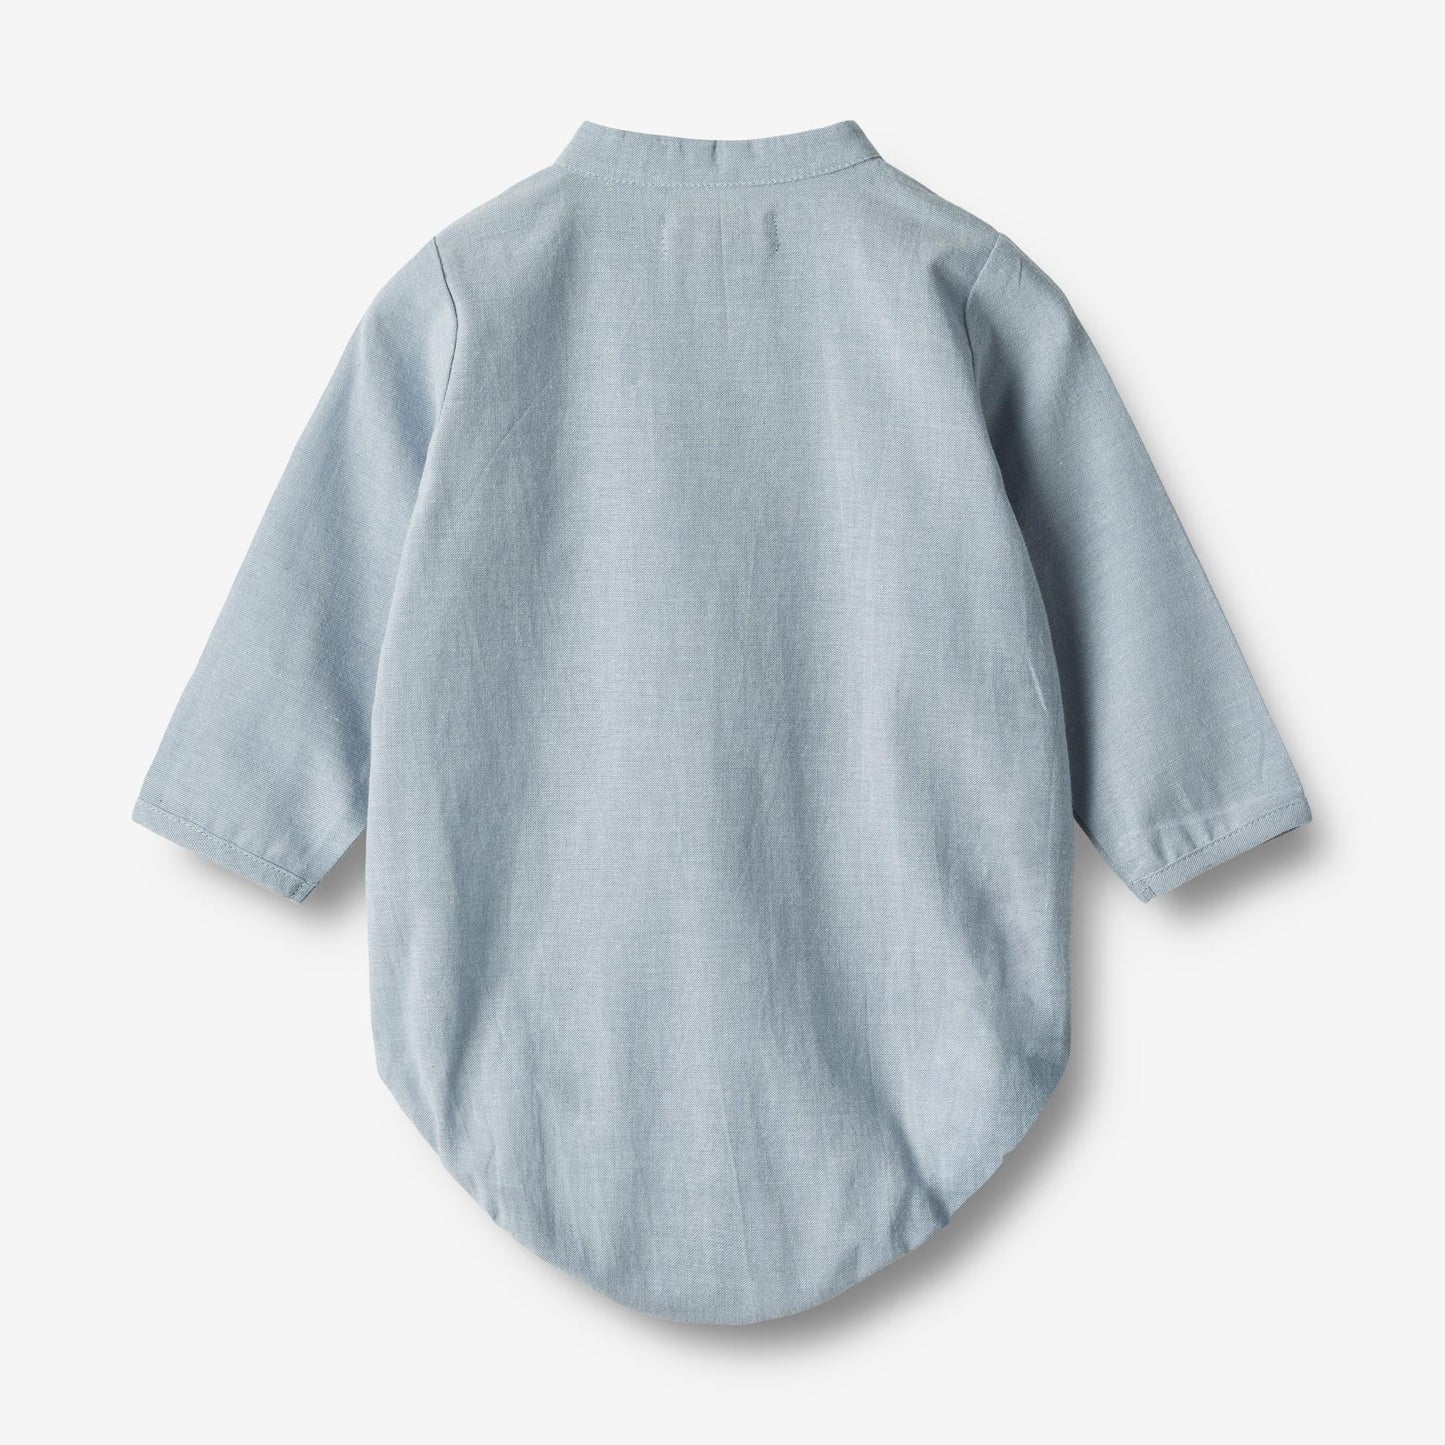 Wheat 'Victor' Baby Romper Shirt - Blue Waves